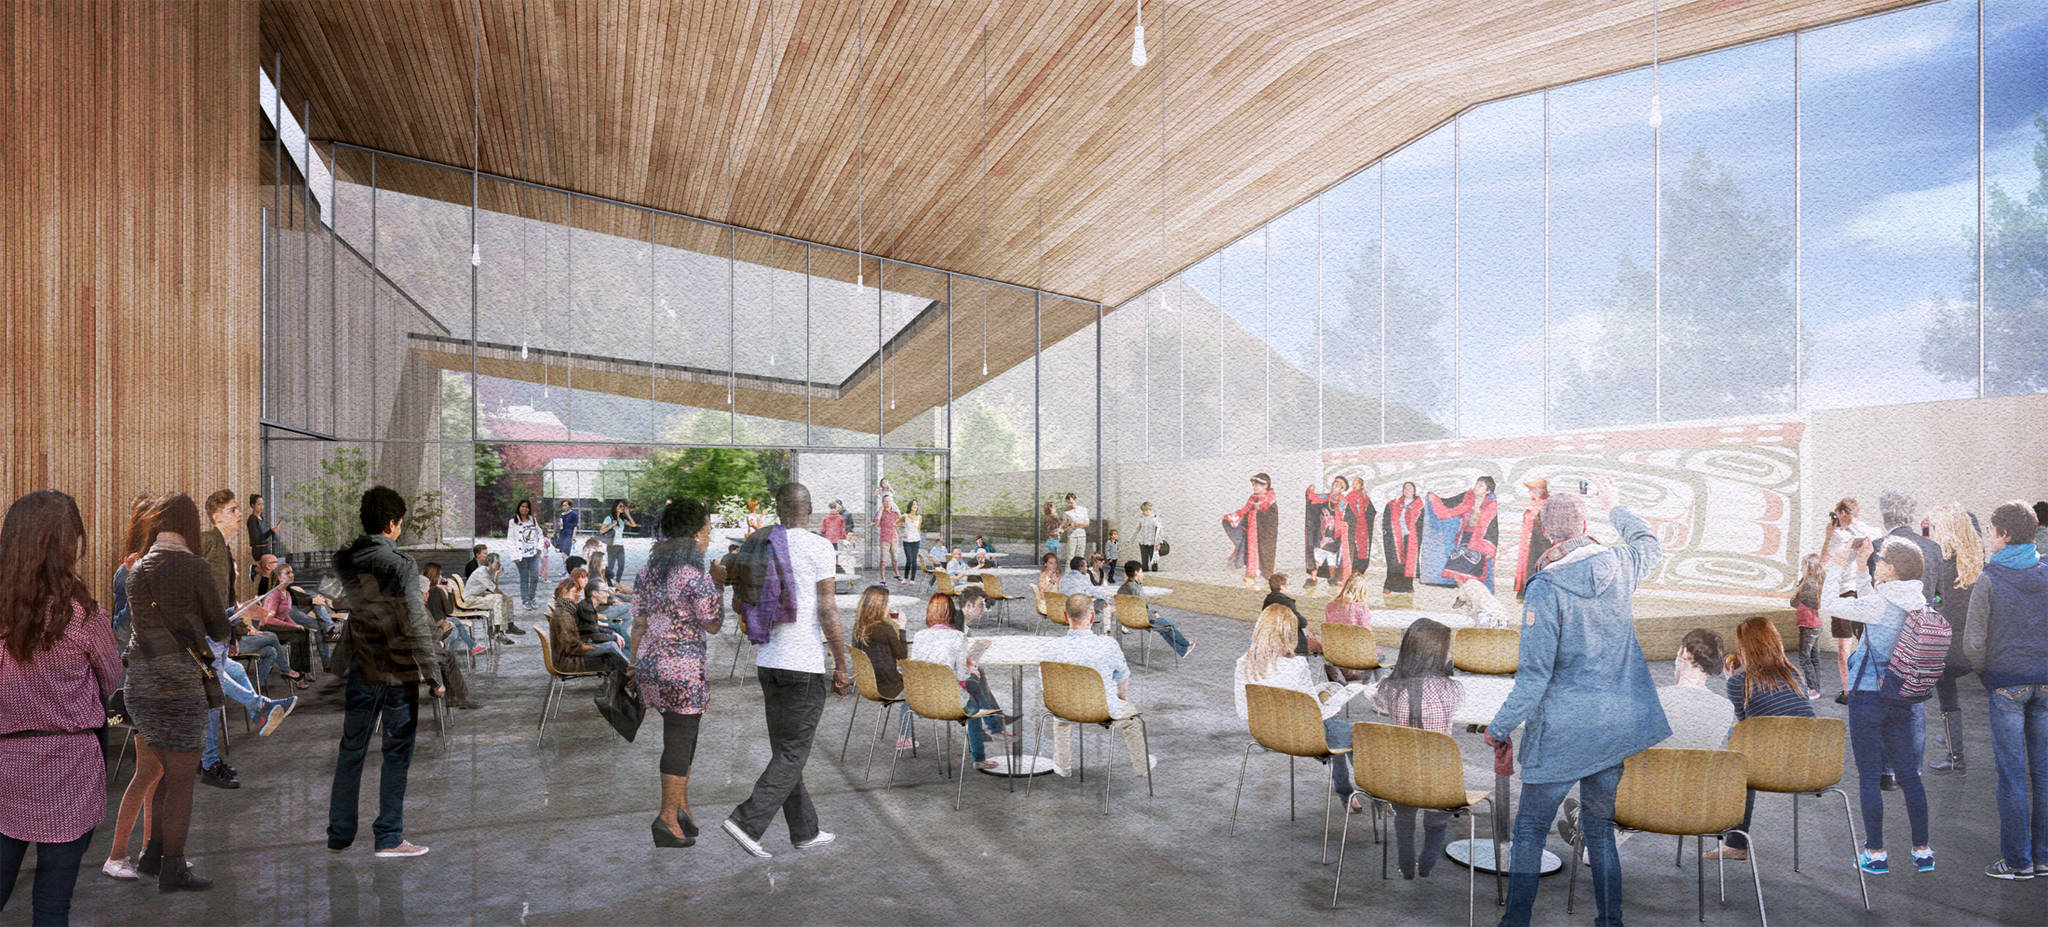 The new JACC’s community hall, as depicted in artist renderings. Courtesy image.